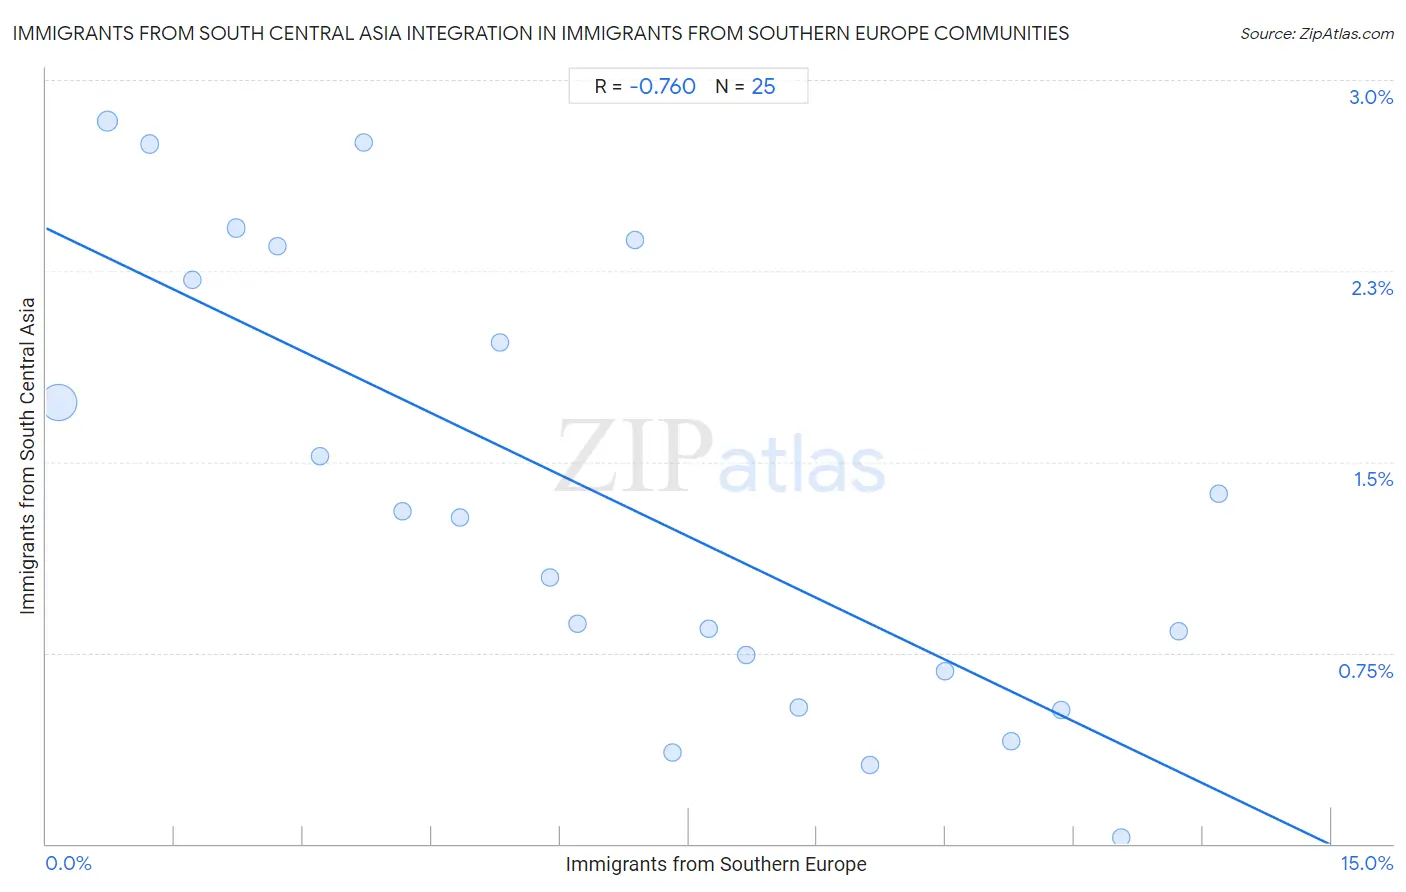 Immigrants from Southern Europe Integration in Immigrants from South Central Asia Communities